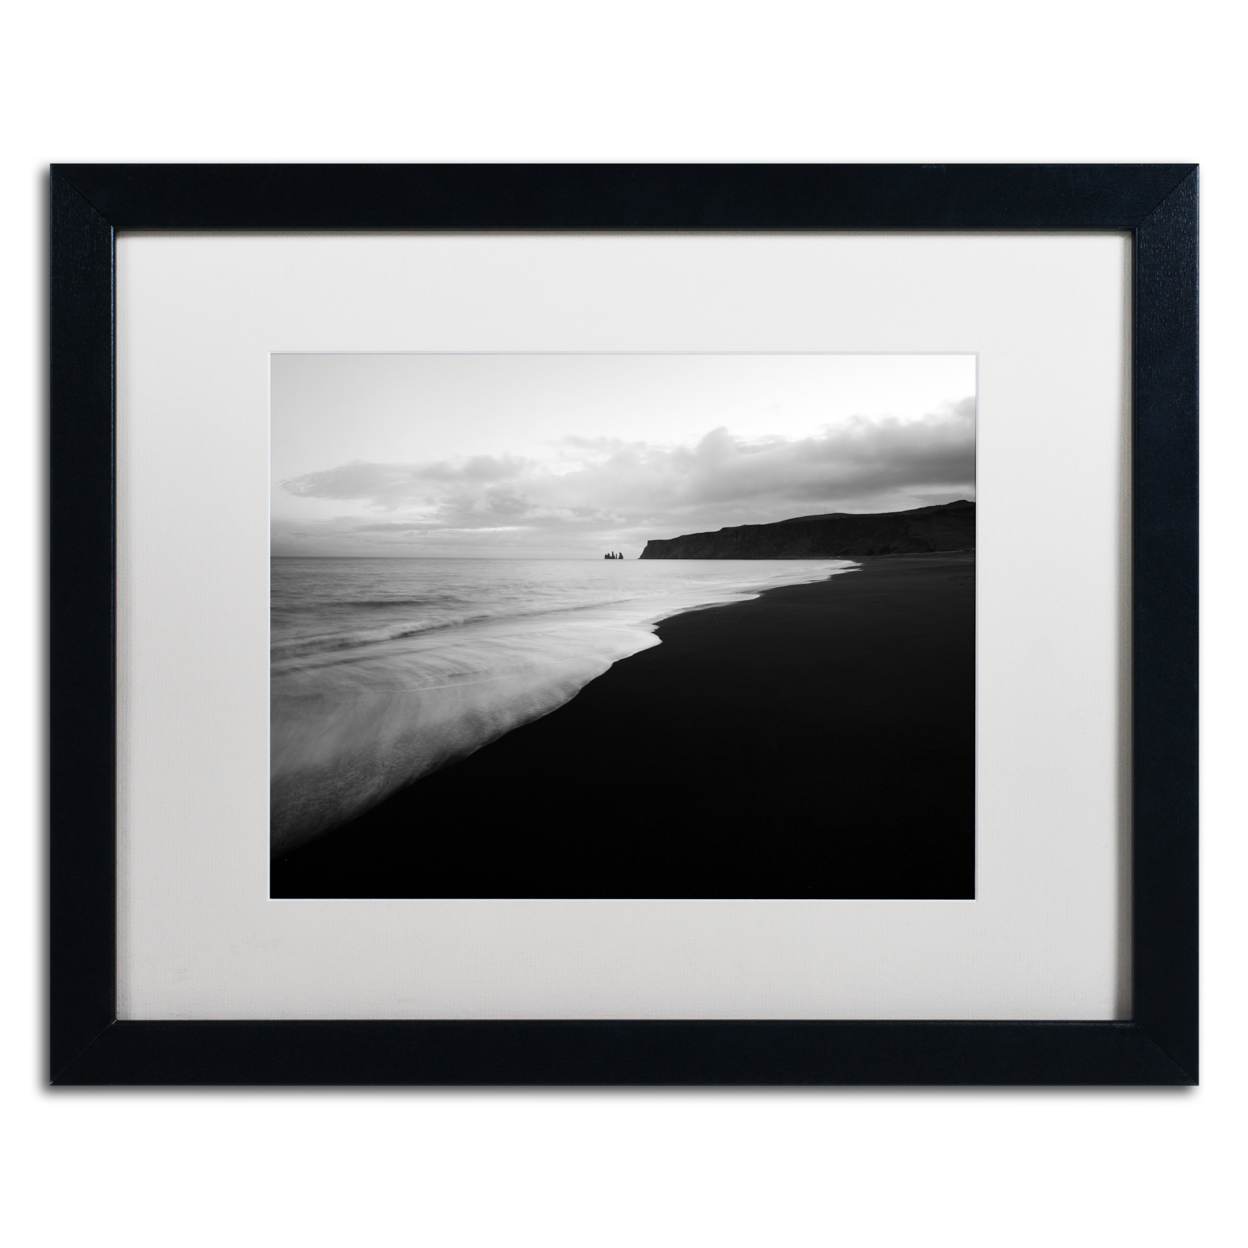 Philippe Sainte-Laudy 'On The Black Beach' Black Wooden Framed Art 18 X 22 Inches